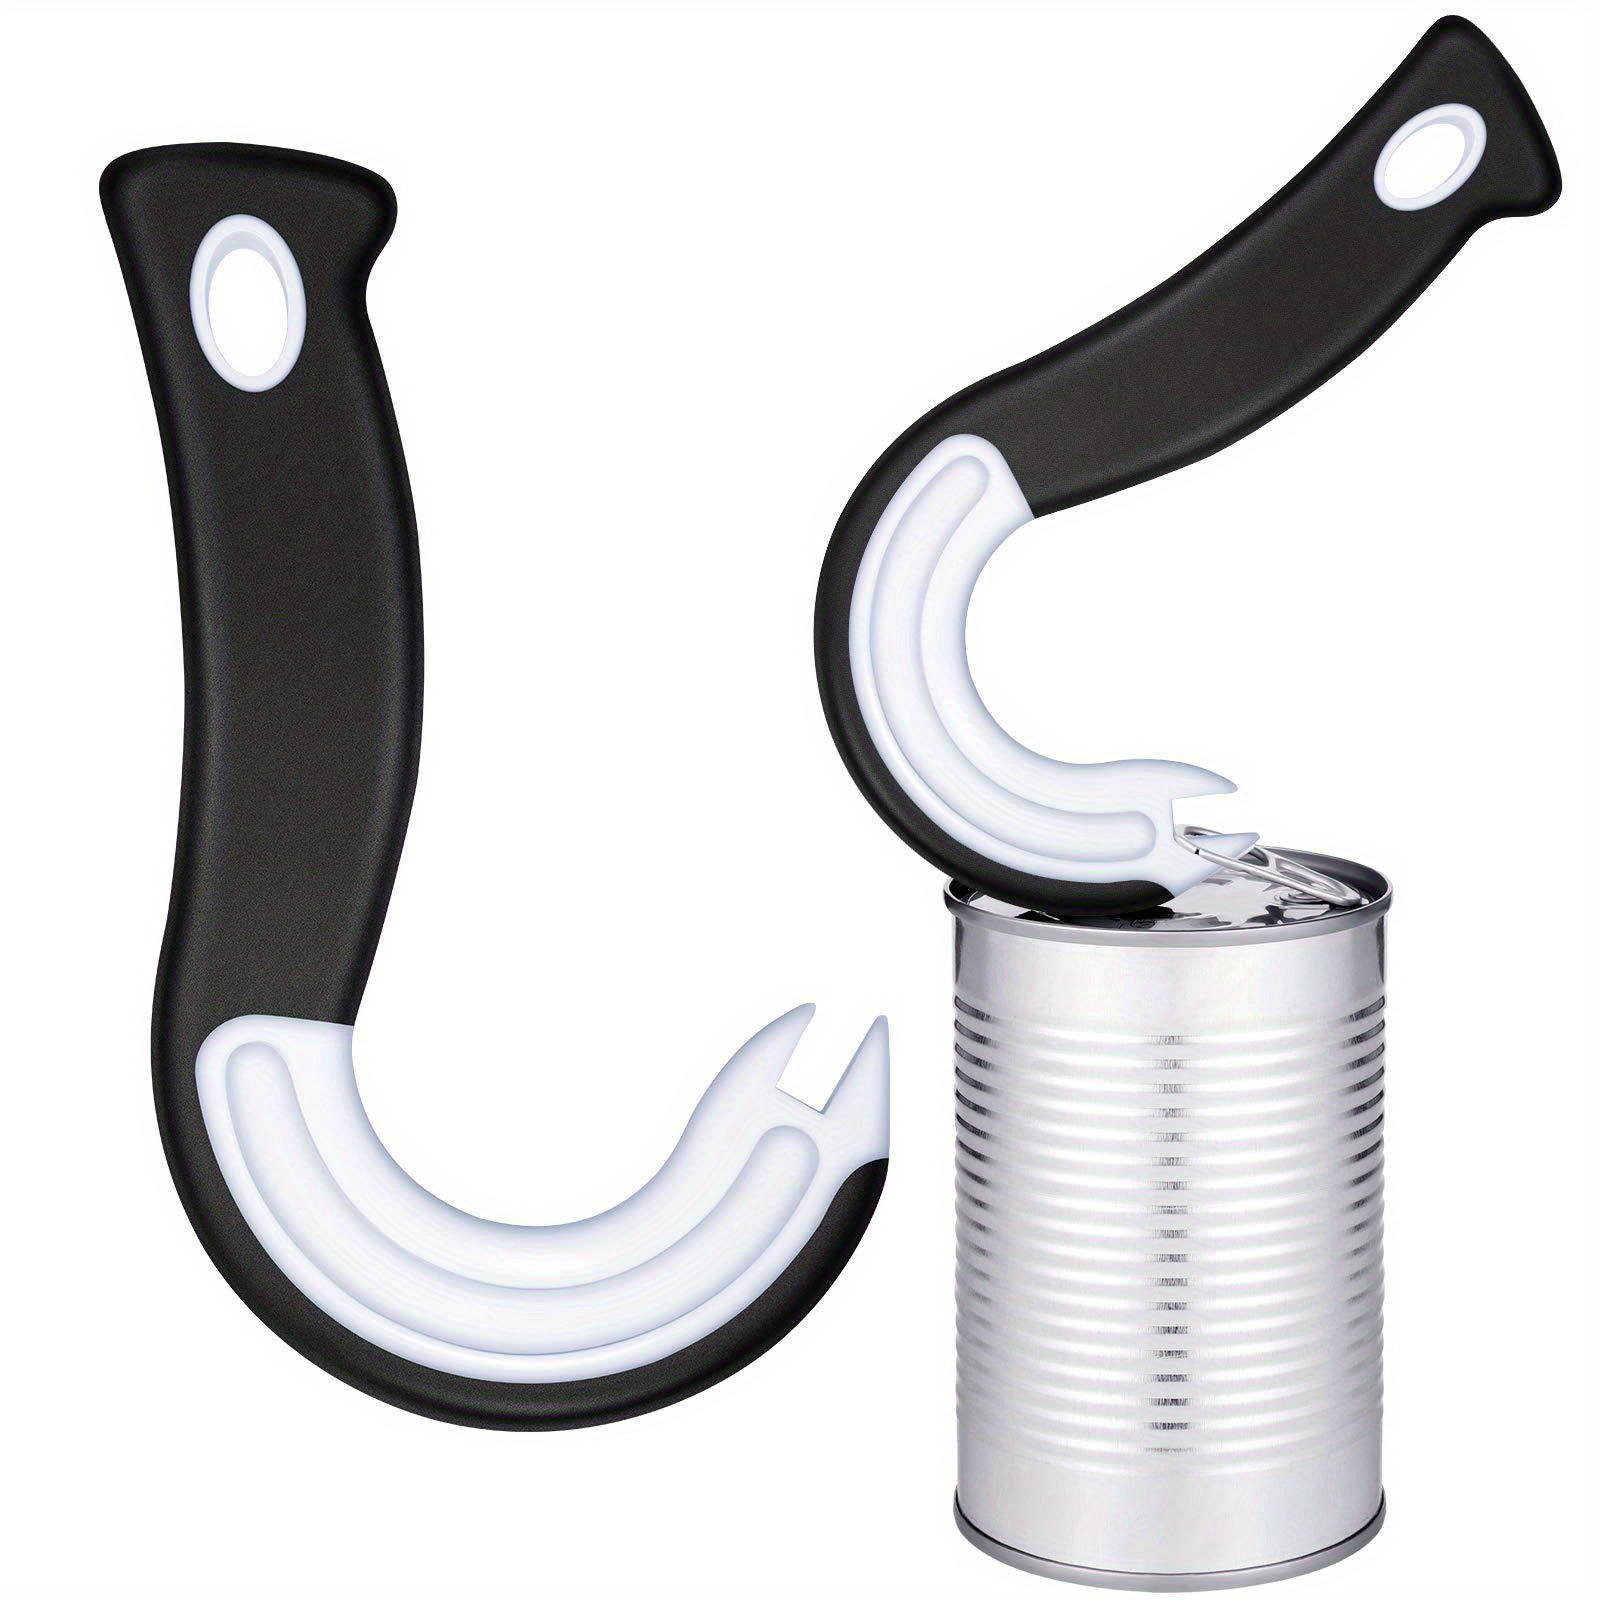 Magipull Tin Can Ring Pull Opener - Homelook Shop